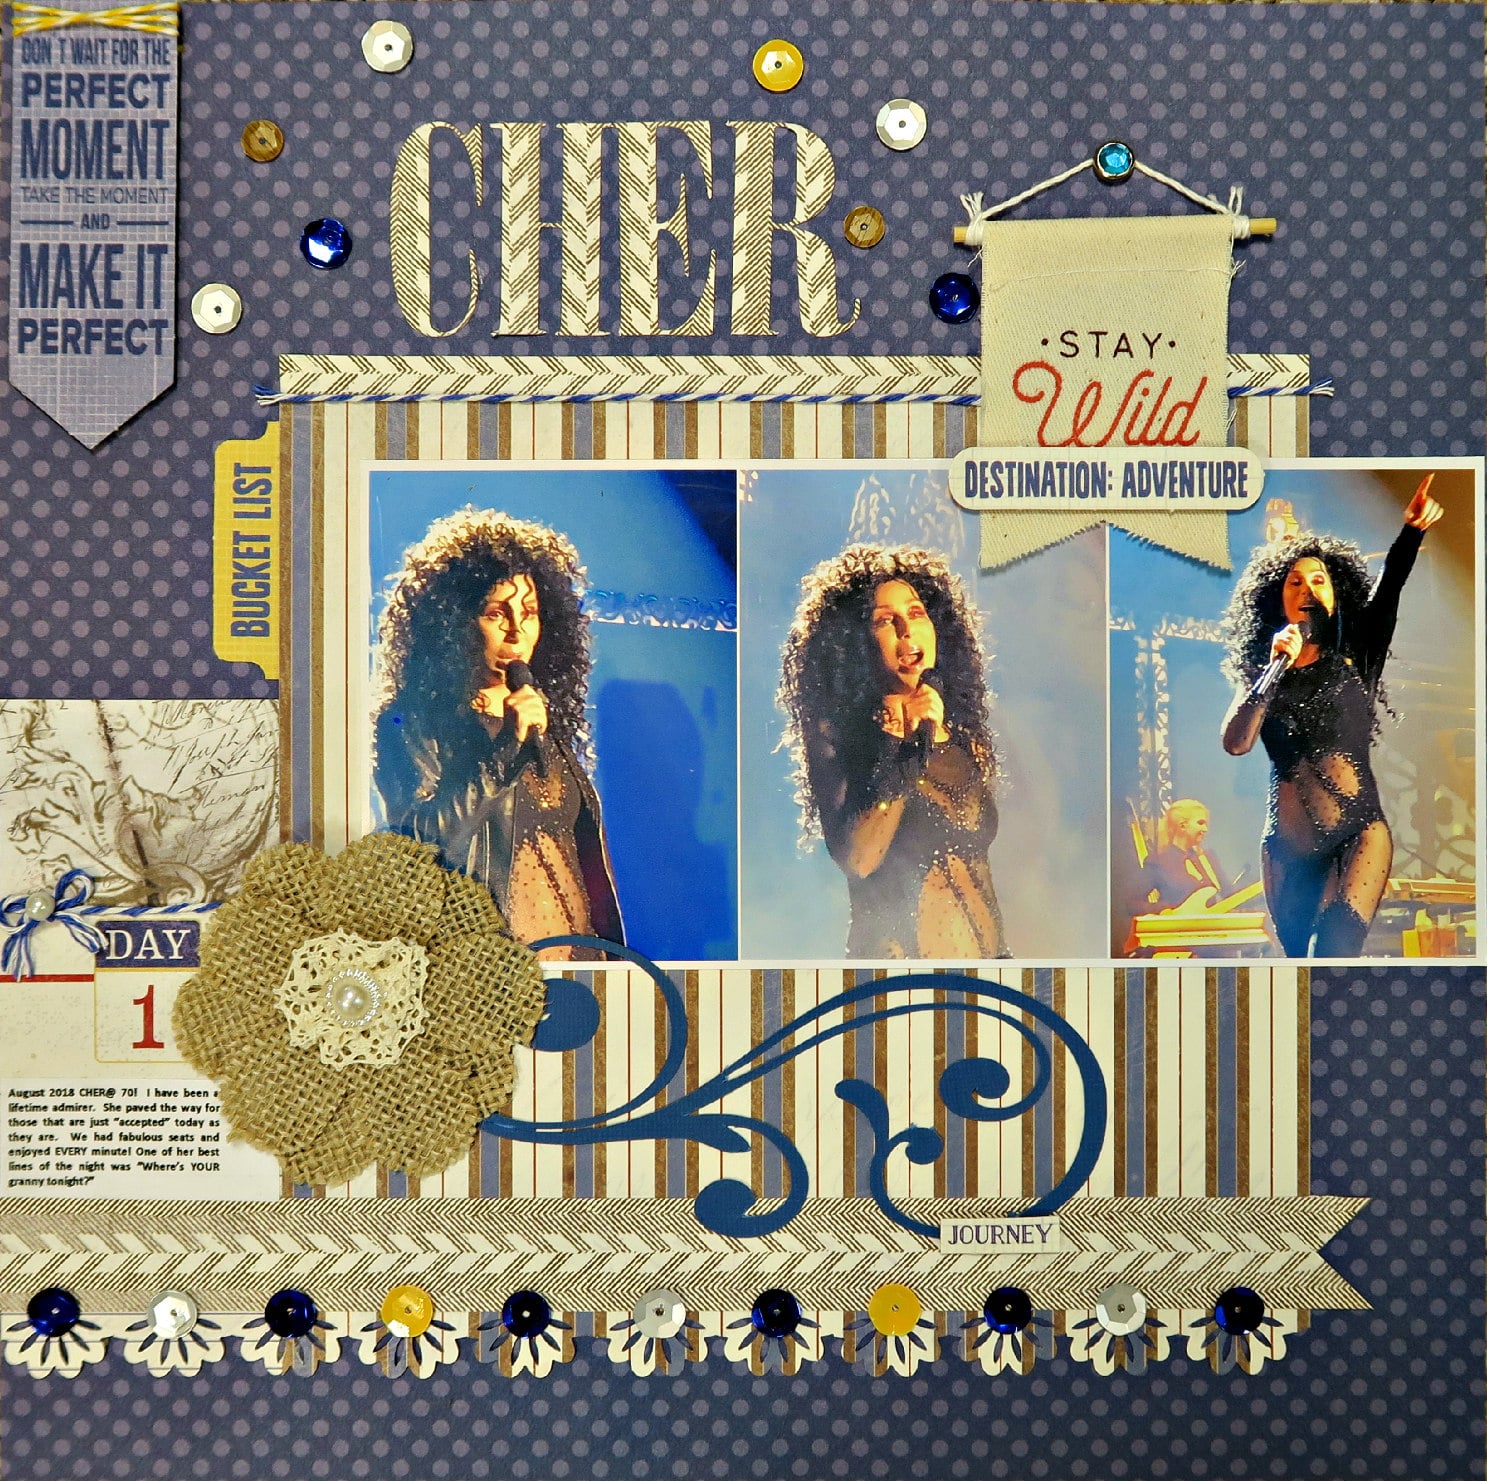 ScrapbookingStore June 2019 kit - Our Design Team members used all crafting materials from our June 2019 monthly kit called "Quest" collection by Authentique